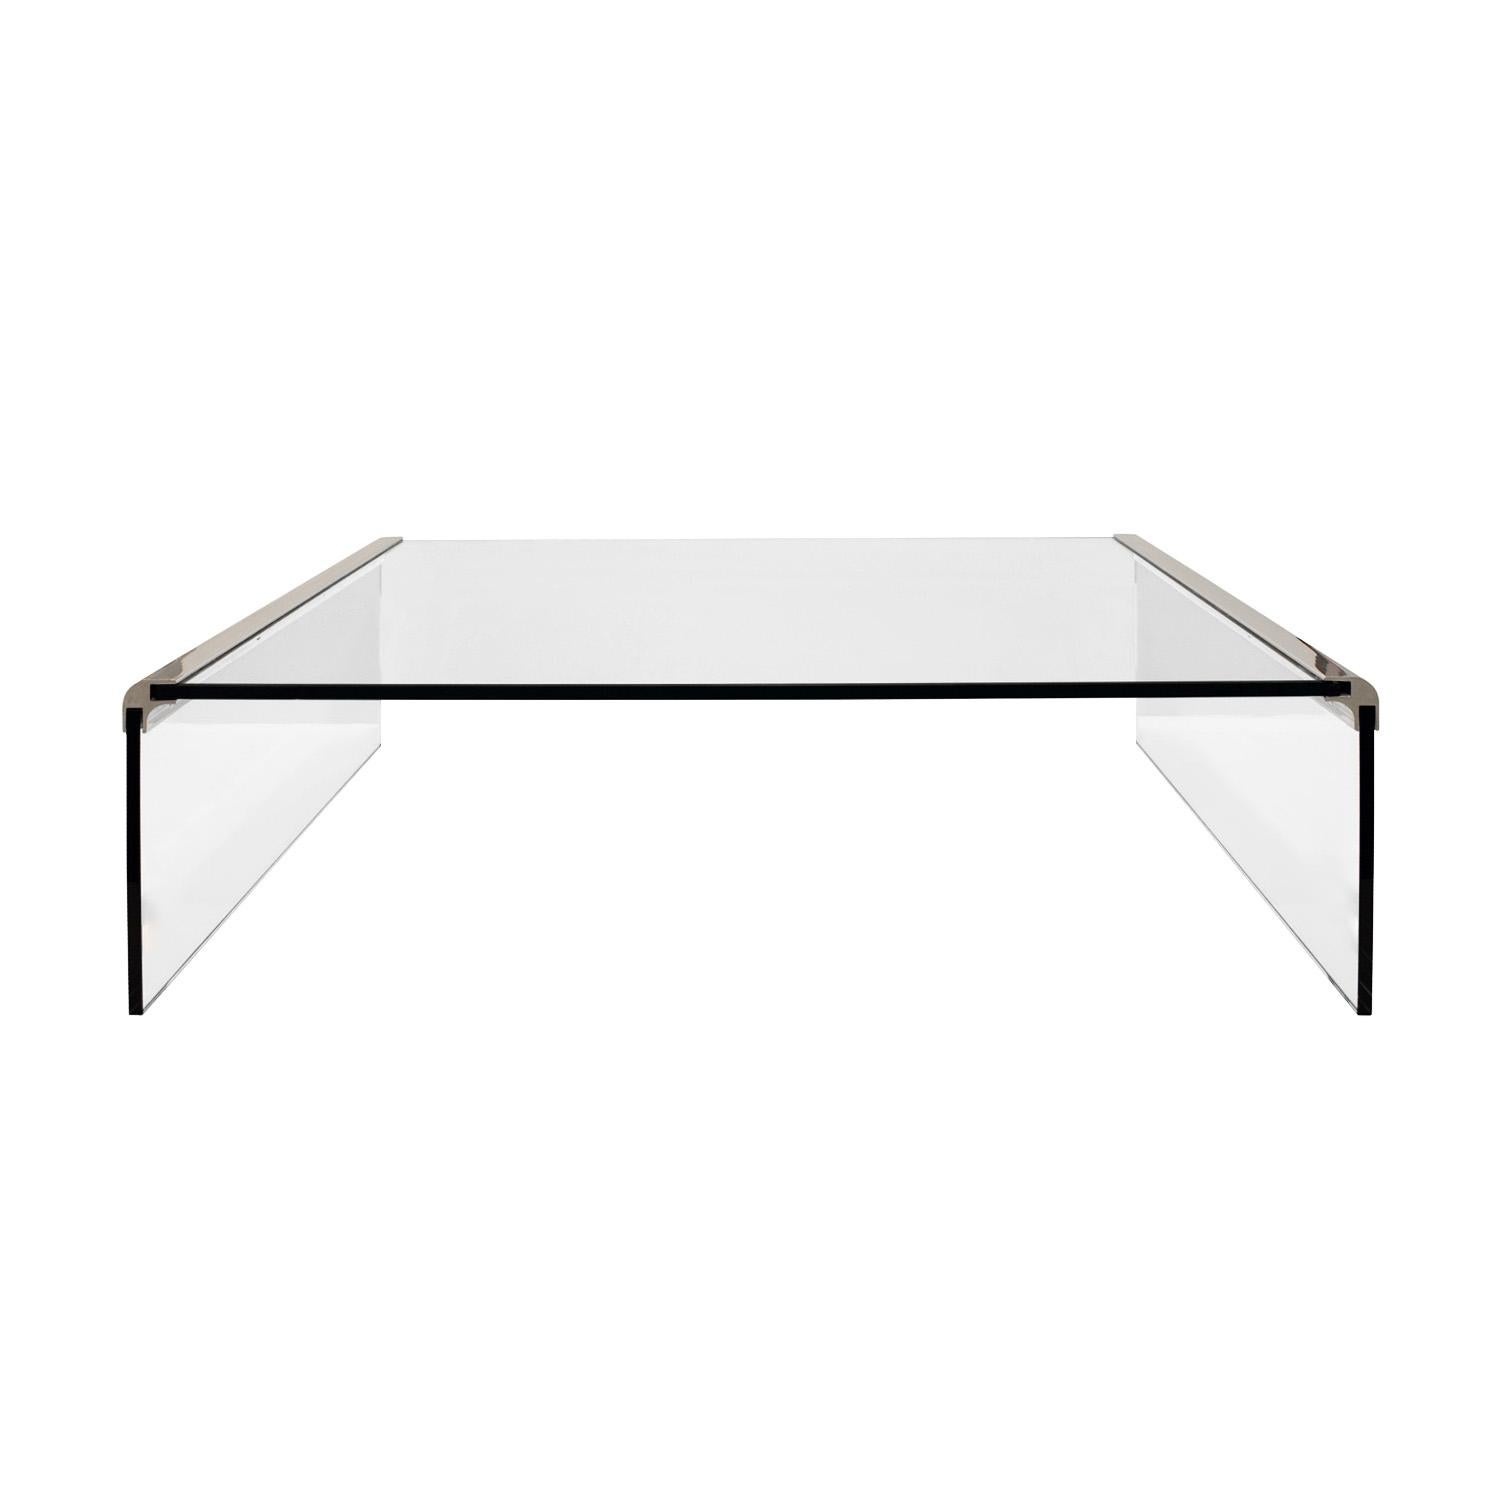 Clean-line waterfall coffee table in polished chrome with thick glass panels by Leon Rosen for Pace Collection, American 1970's.  This coffee table is beautifully  made and very sleek.  Chrome has been professionally polished and Lobel Modern has